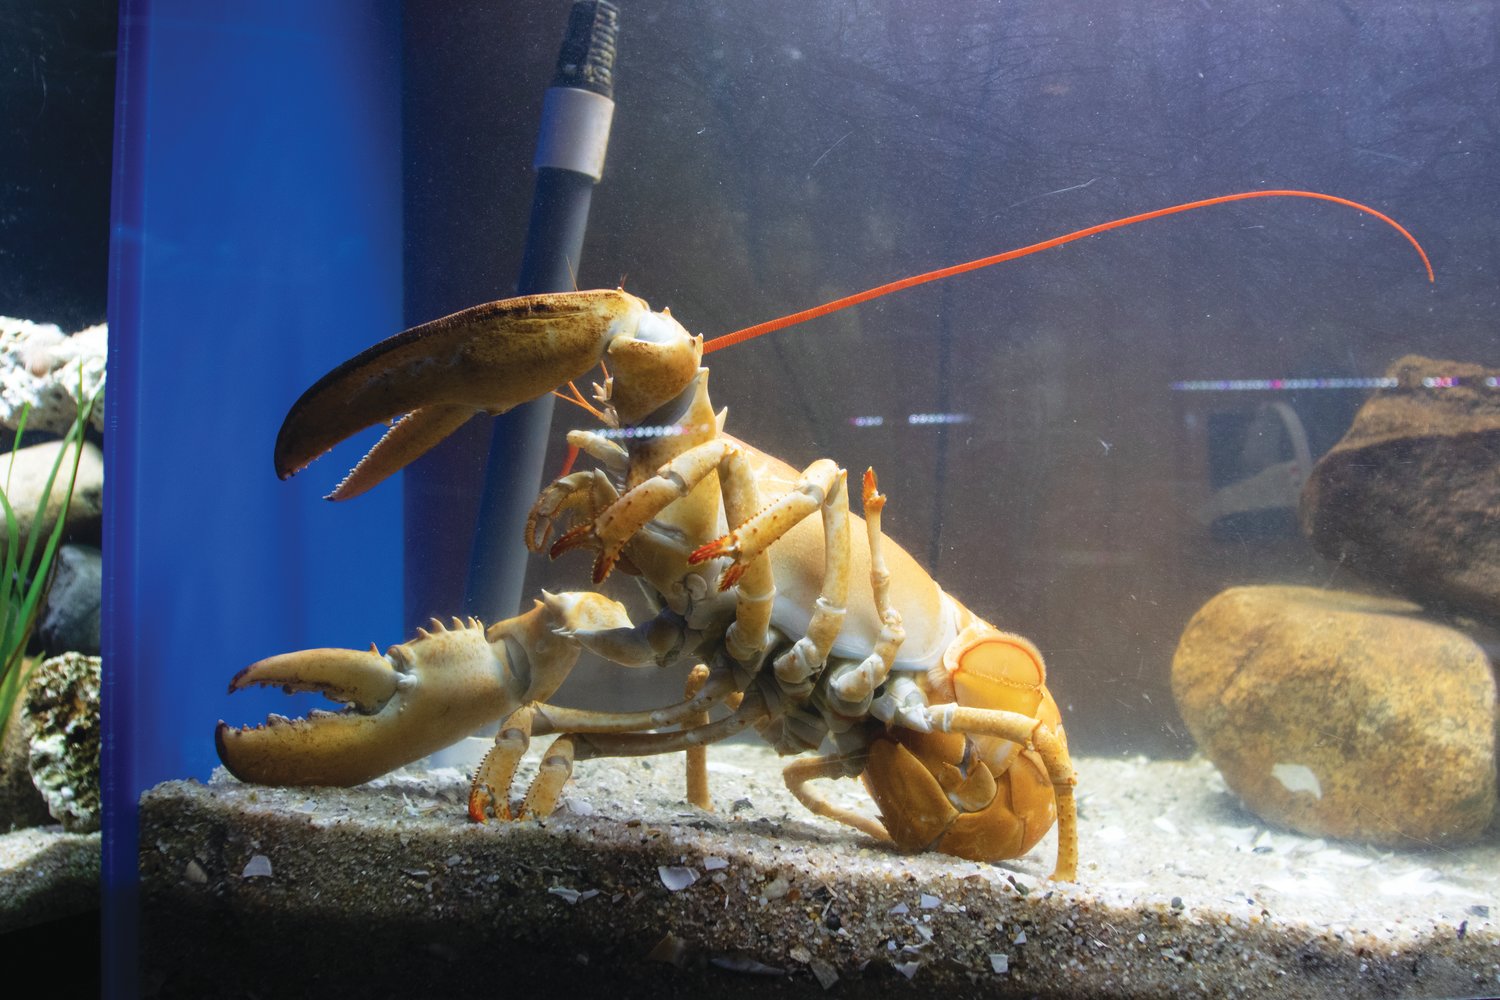 This rare orange lobster has become the Maria Mitchell Aquarium’s mascot. It is estimated to be about 25 years old.